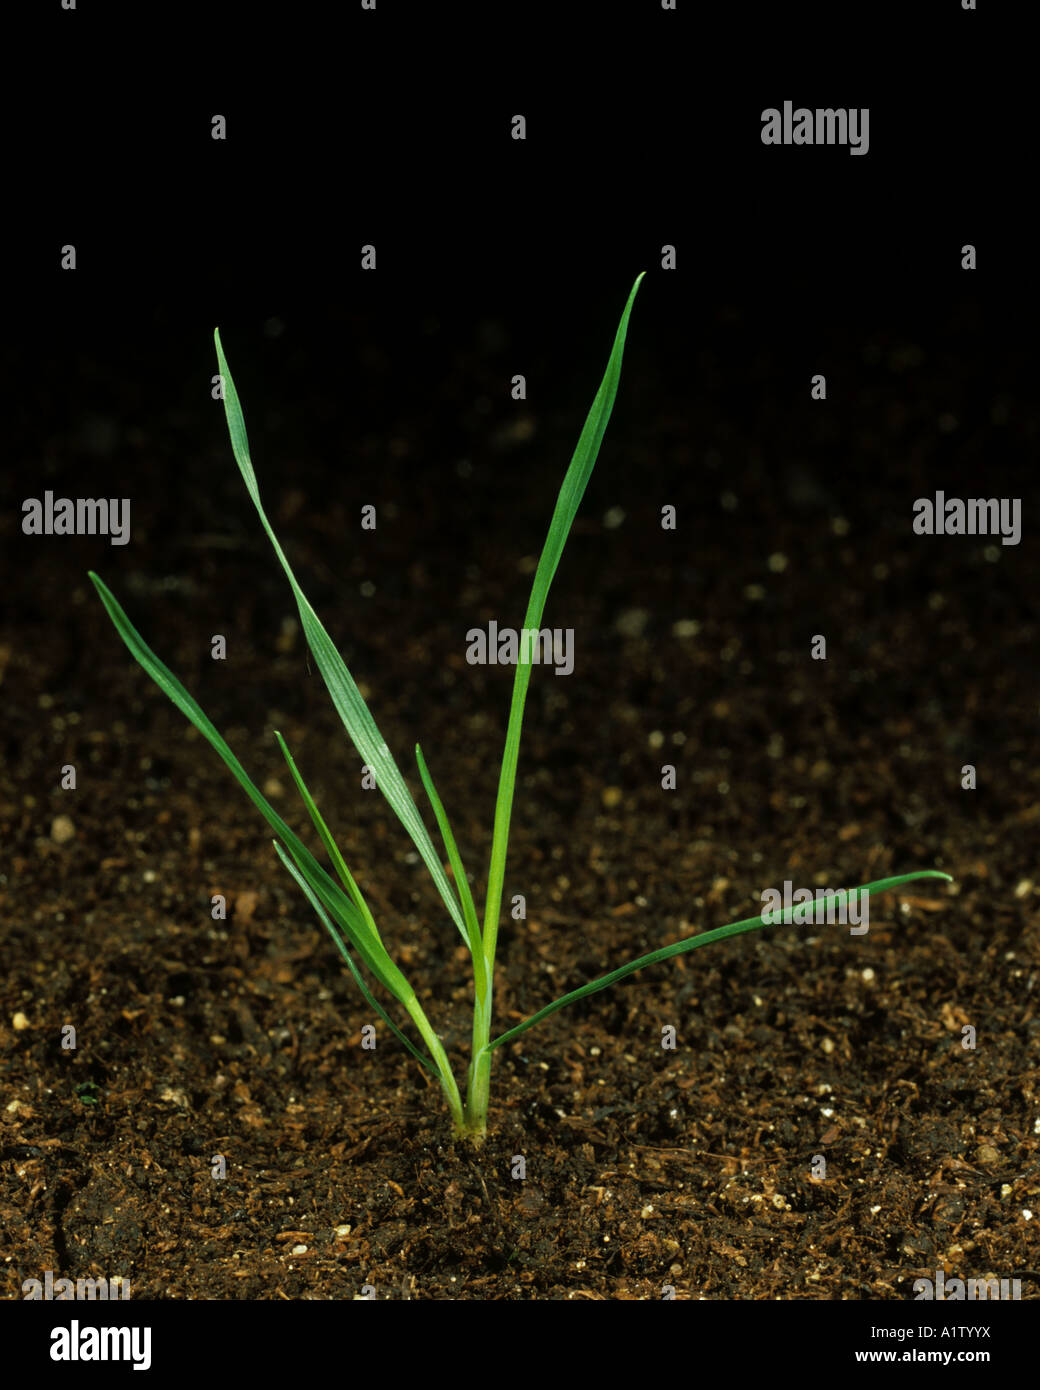 Silky bent Apera spica venti seedling with one tiller Stock Photo